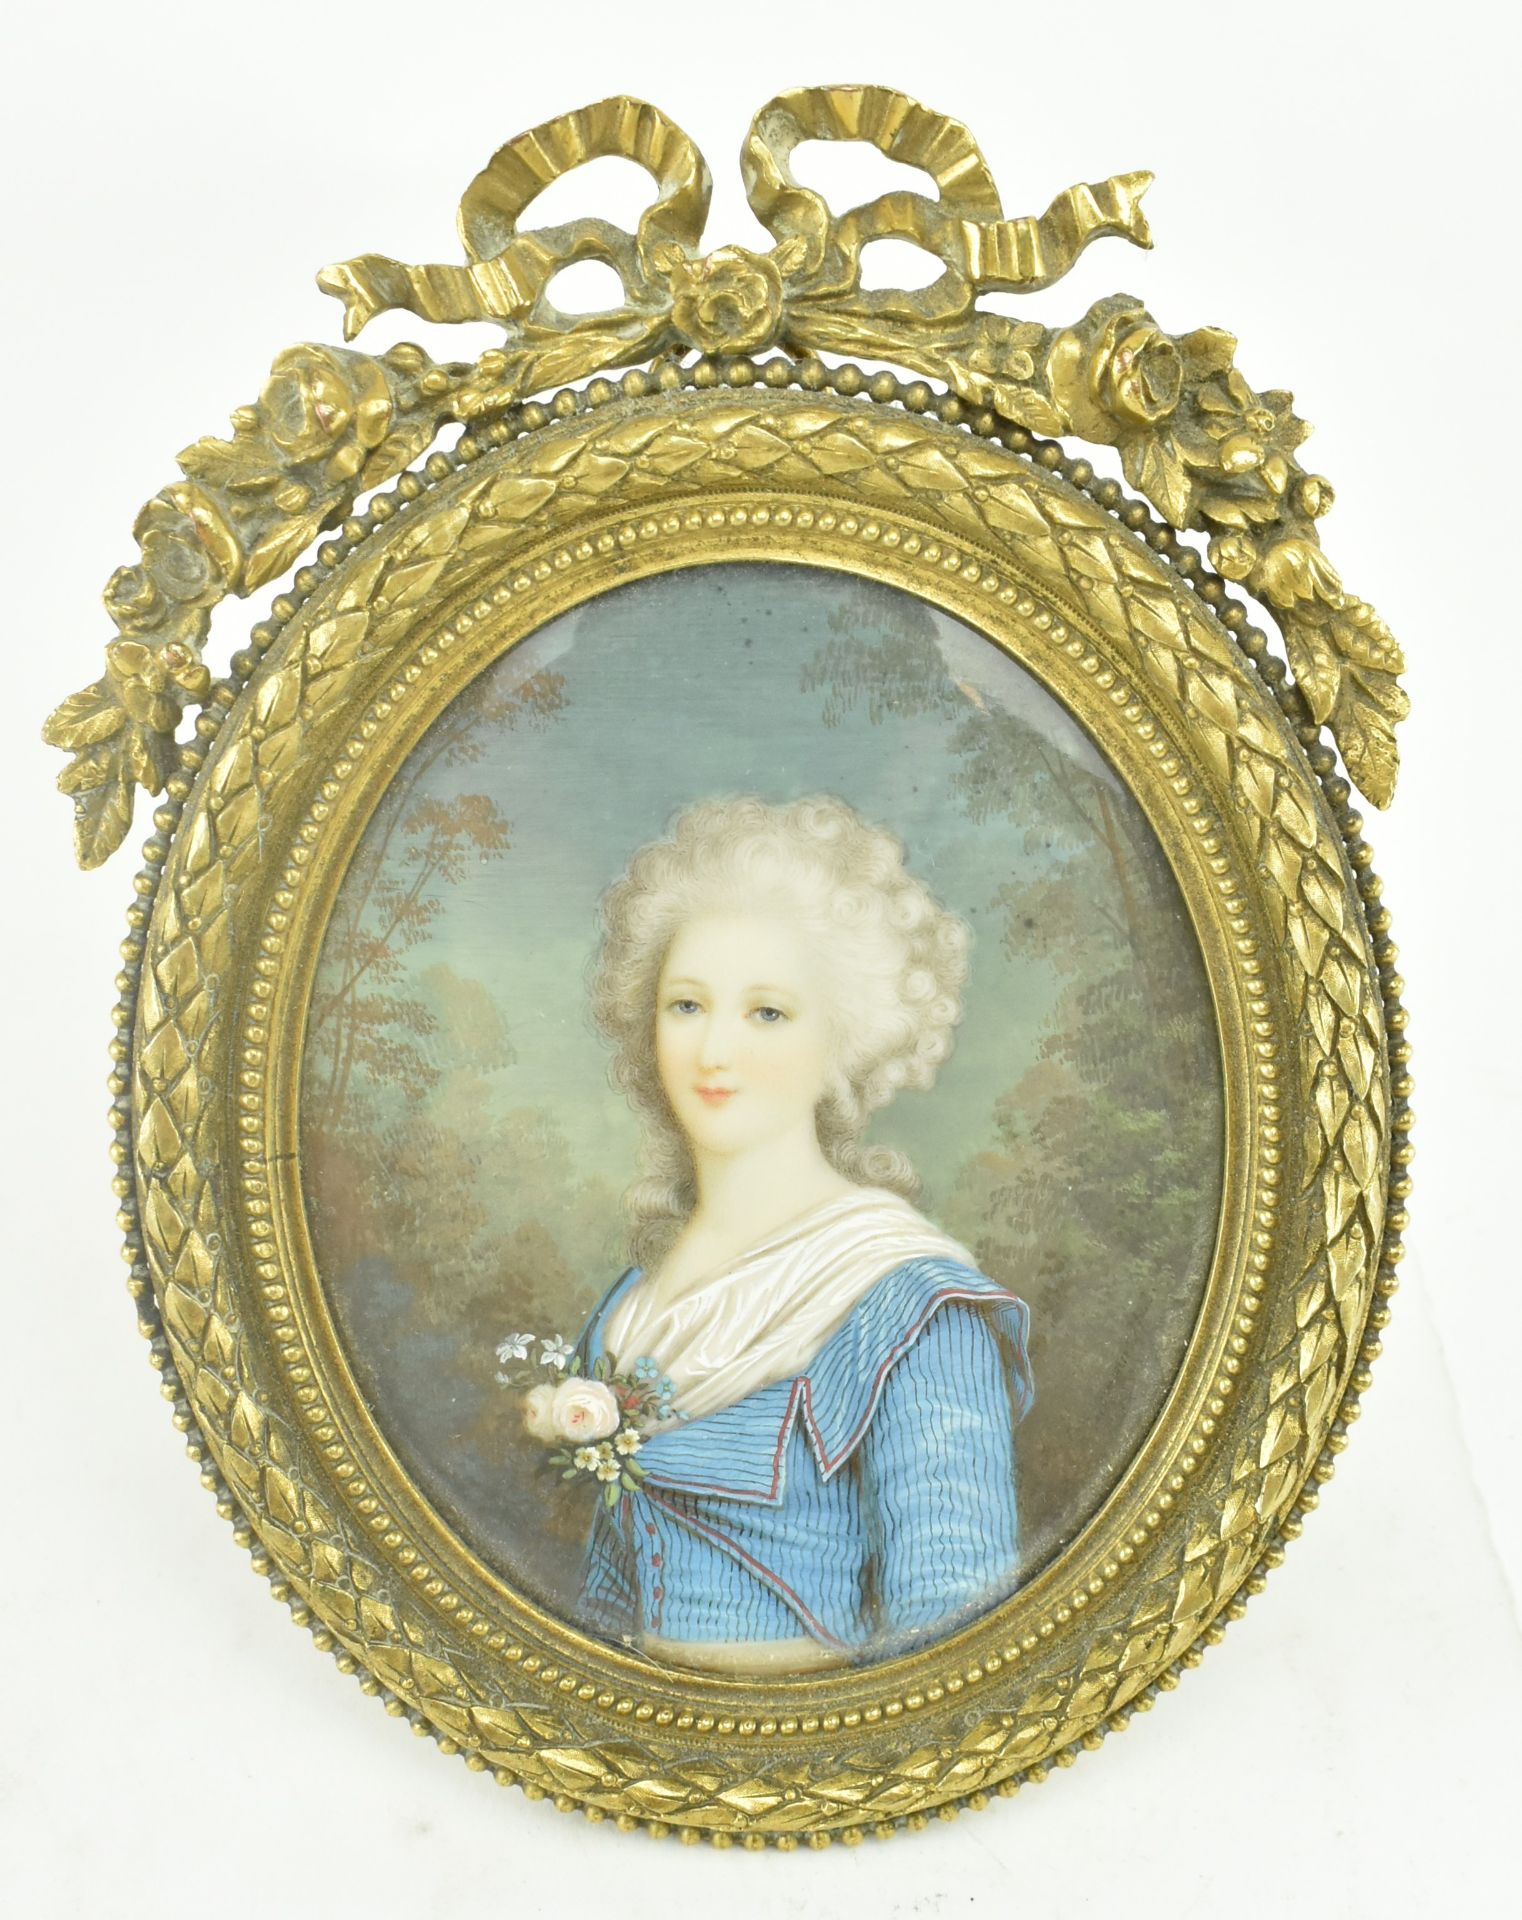 19TH CENTURY FRENCH SCHOOL MINIATURE PORTRAIT ON IVORY - Image 2 of 6